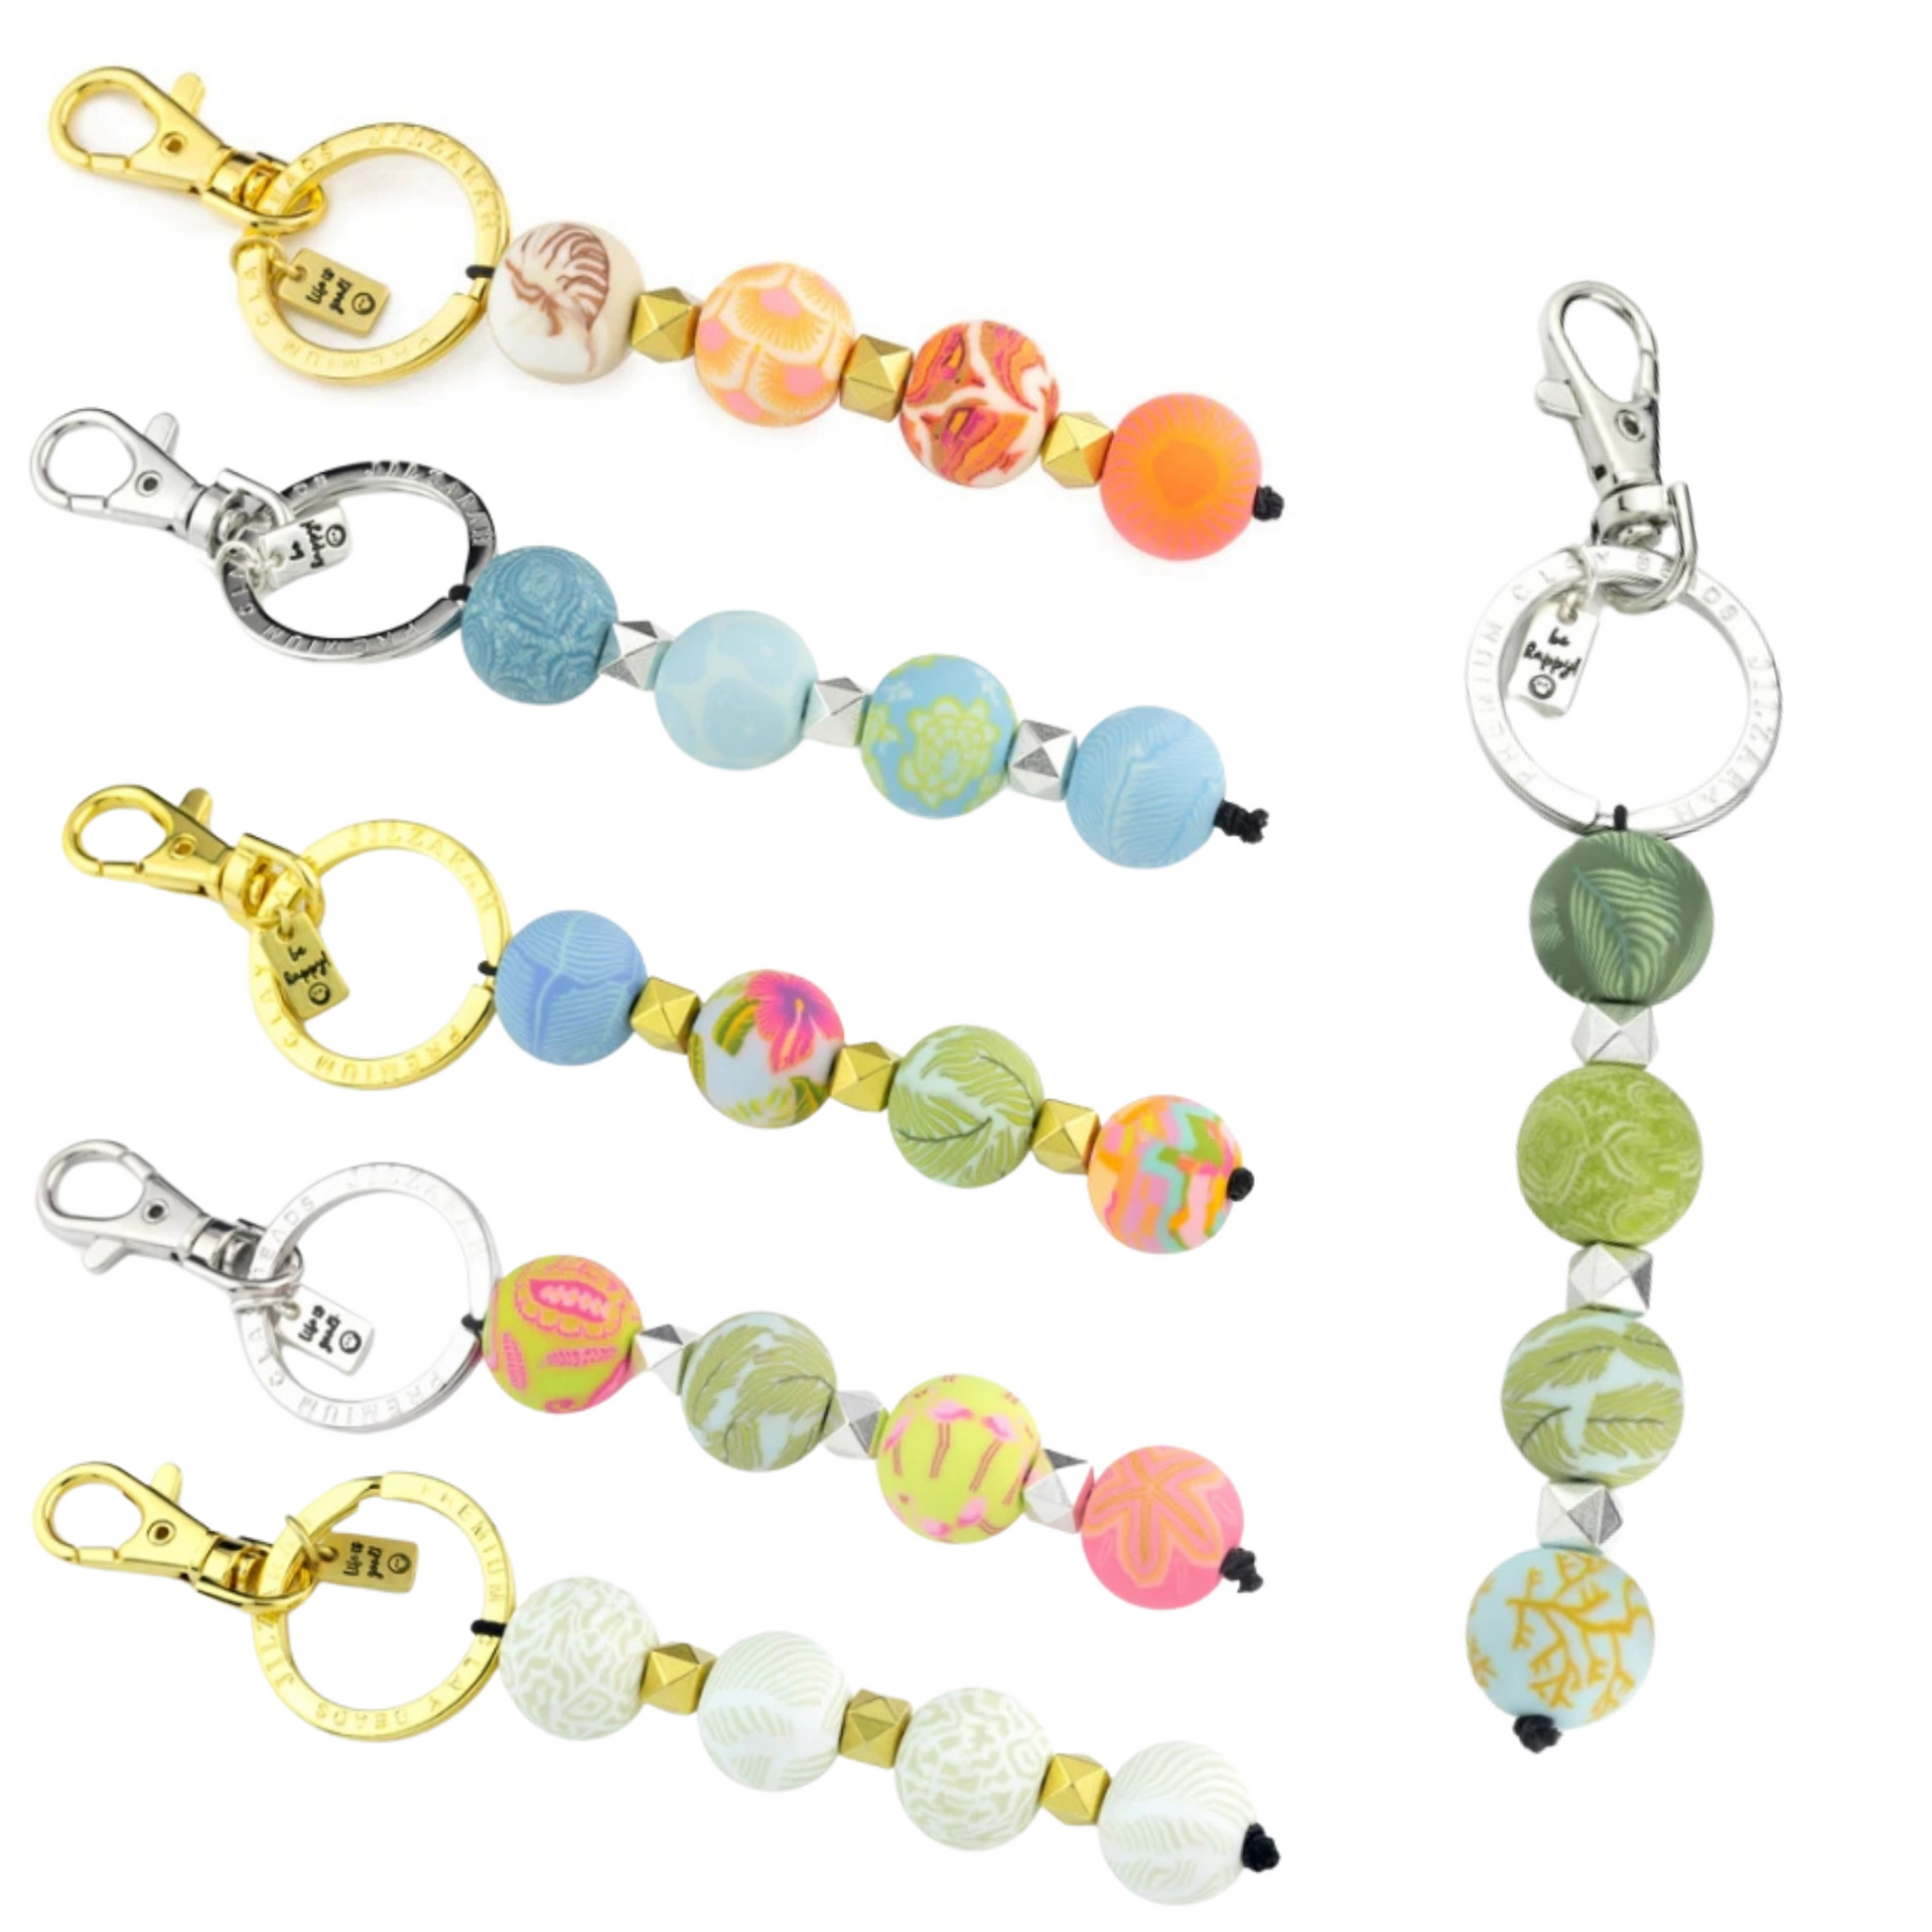 Handmade with bright colors, this Clay Bead Keychain adds a unique touch to any set of keys. Crafted with care, each clay bead is carefully shaped and hand-painted, making every keychain one-of-a-kind. A colorful and eye-catching addition to your everyday essentials.